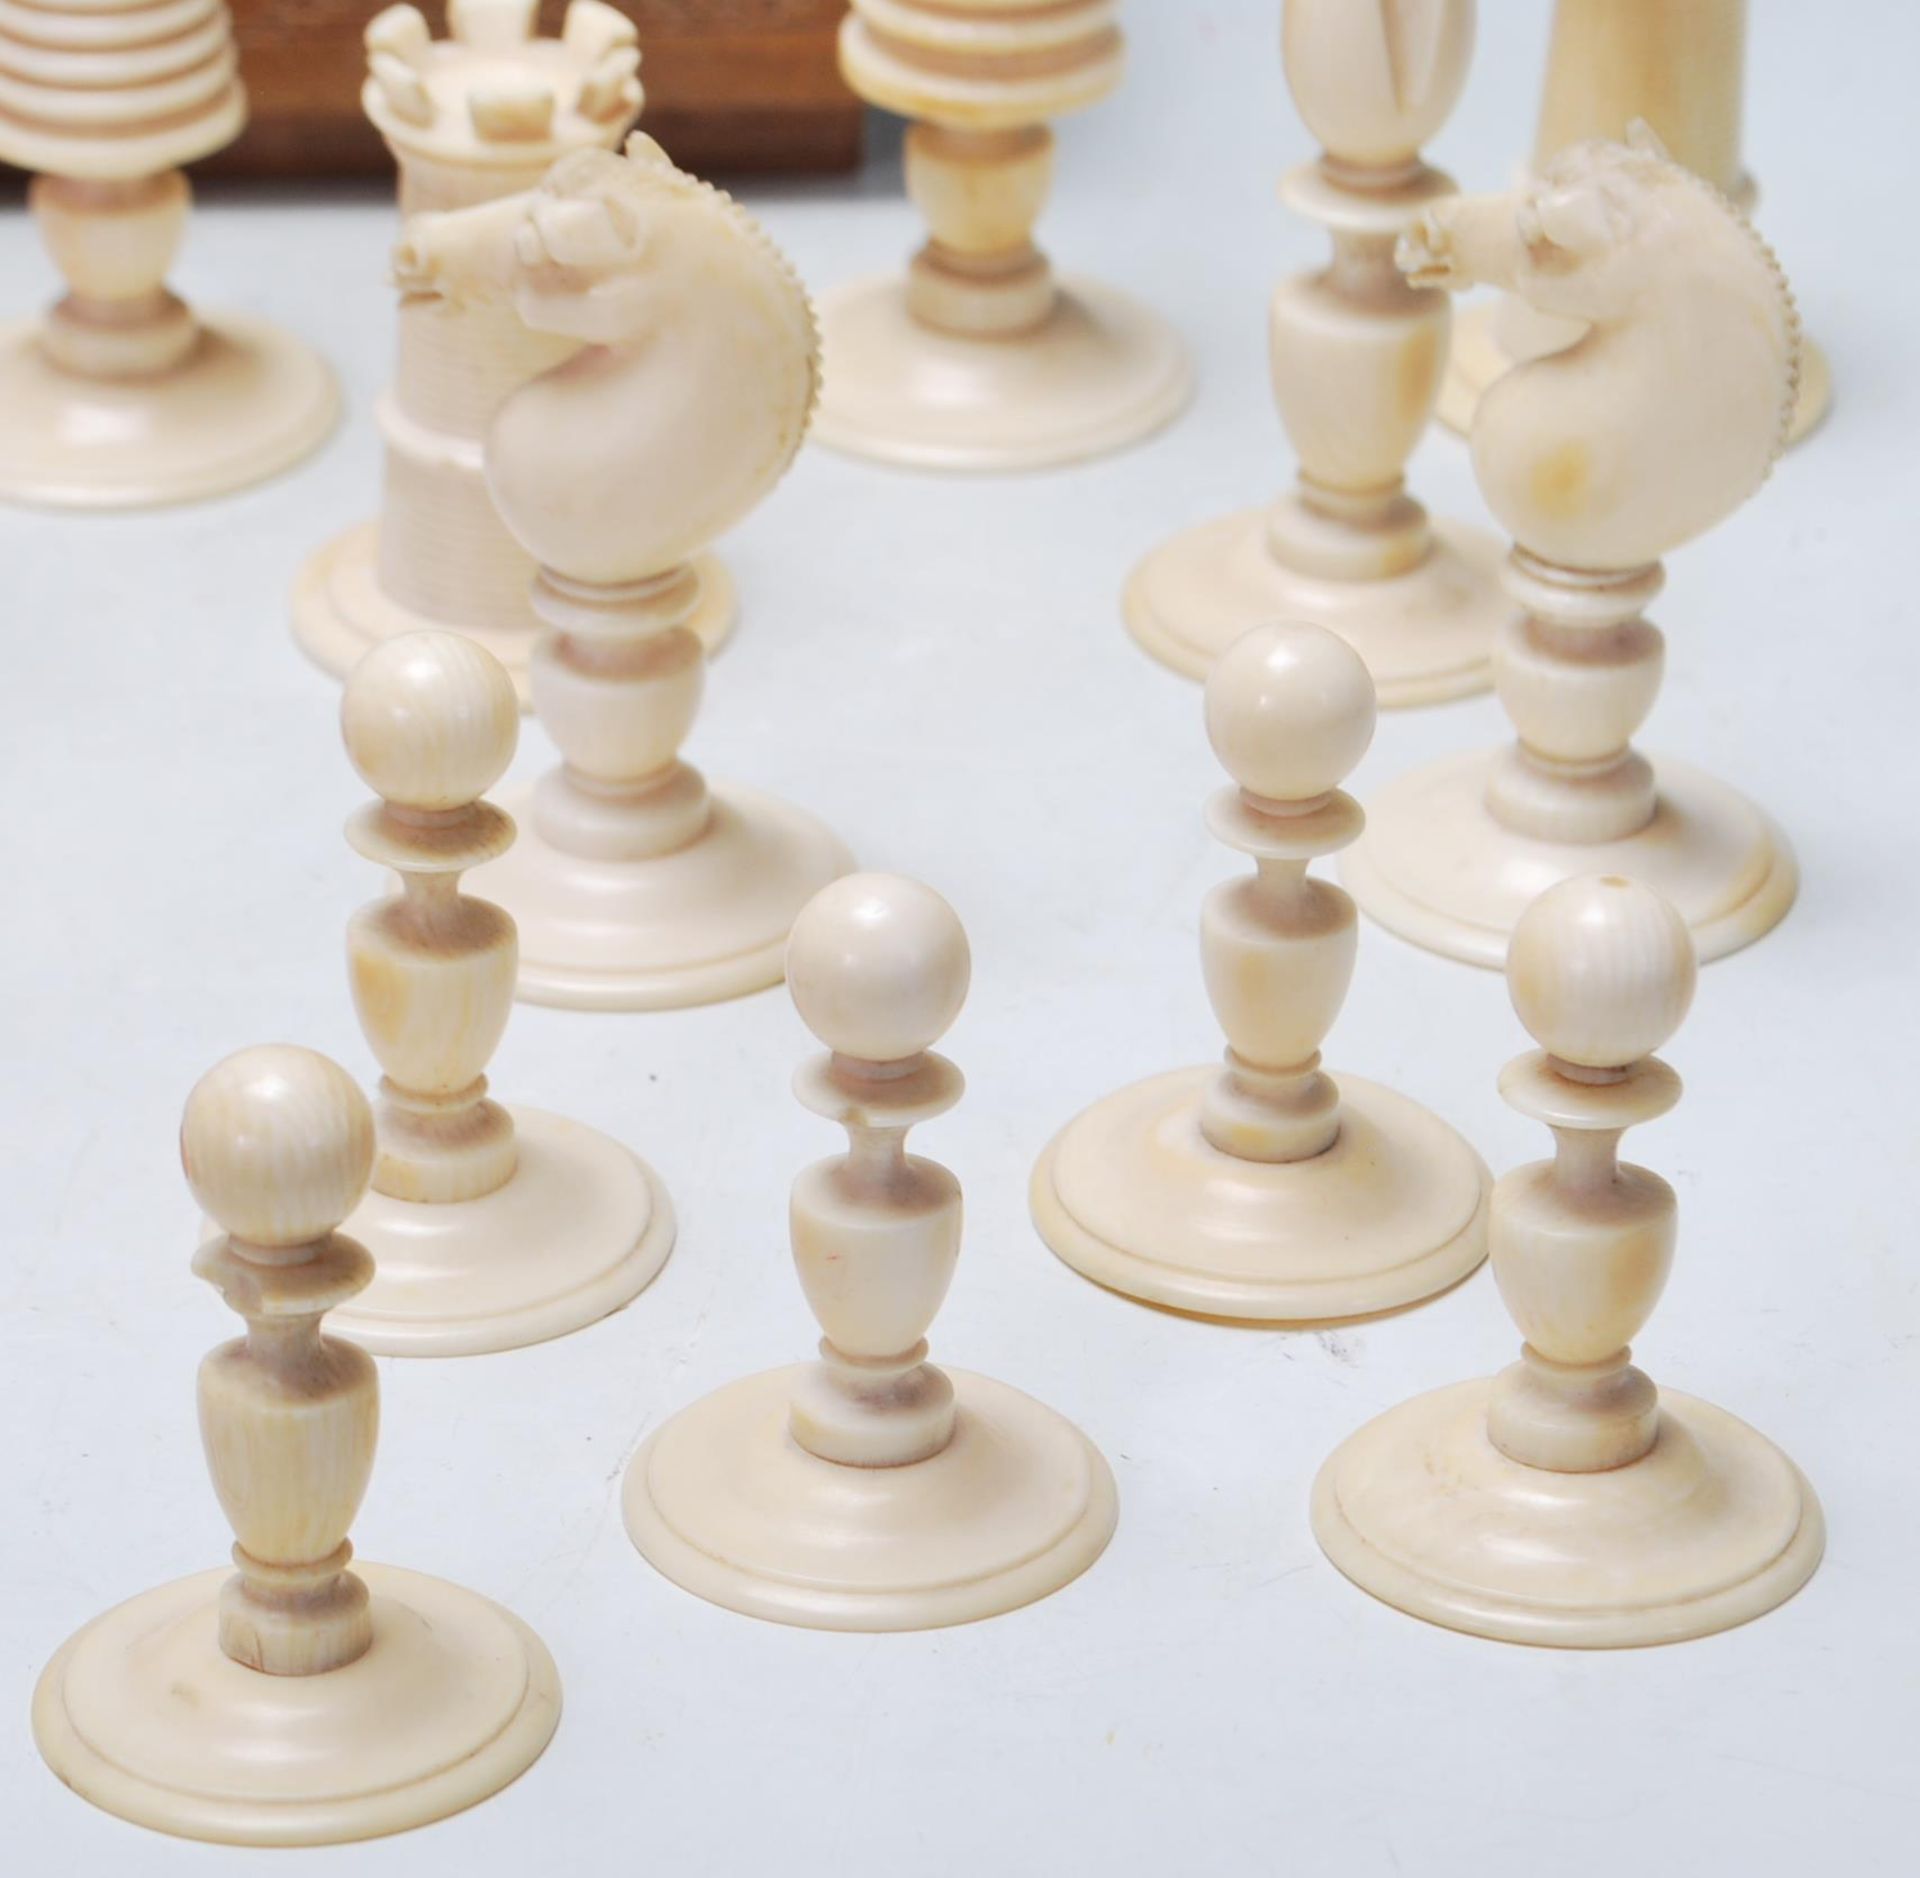 GROUP OF 19TH CENTURY VICTORIAN SATIN IVORY CHESS PIECES - Image 2 of 9